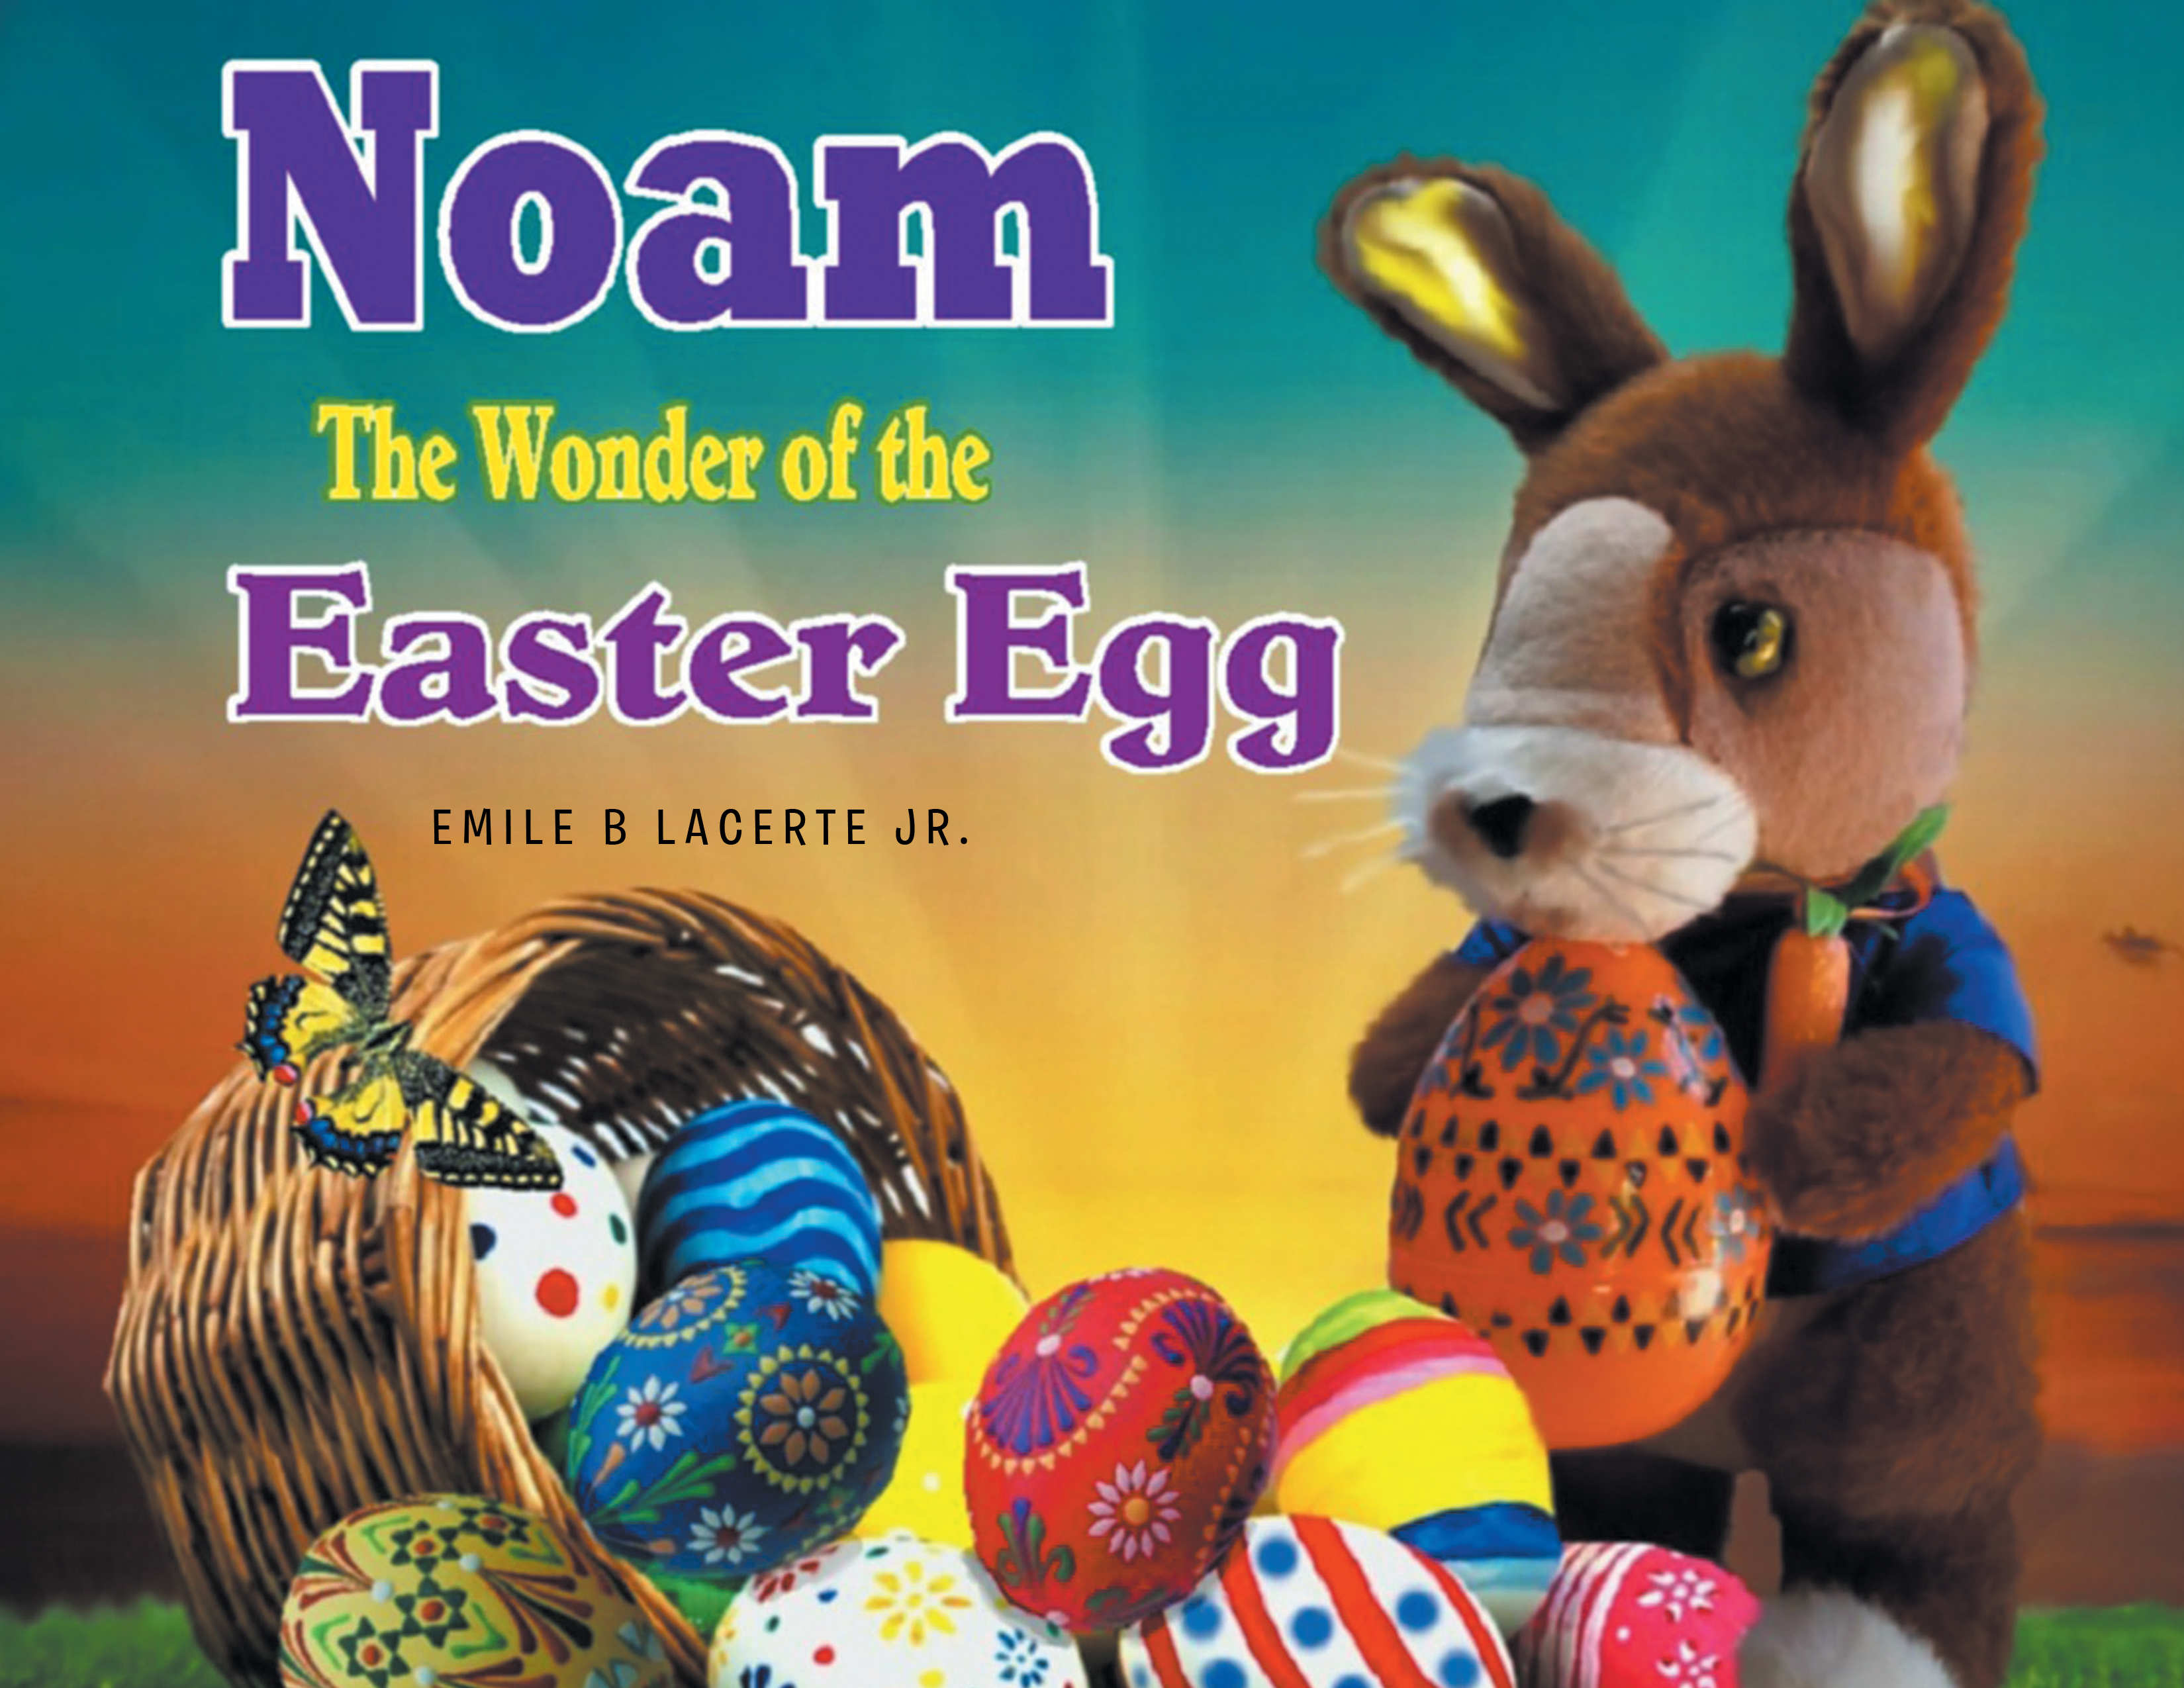 Emile B LaCerte Jr’s Newly Released “Noam The Wonder of the Easter Egg” is a Heartwarming Tale of Tradition and Hope